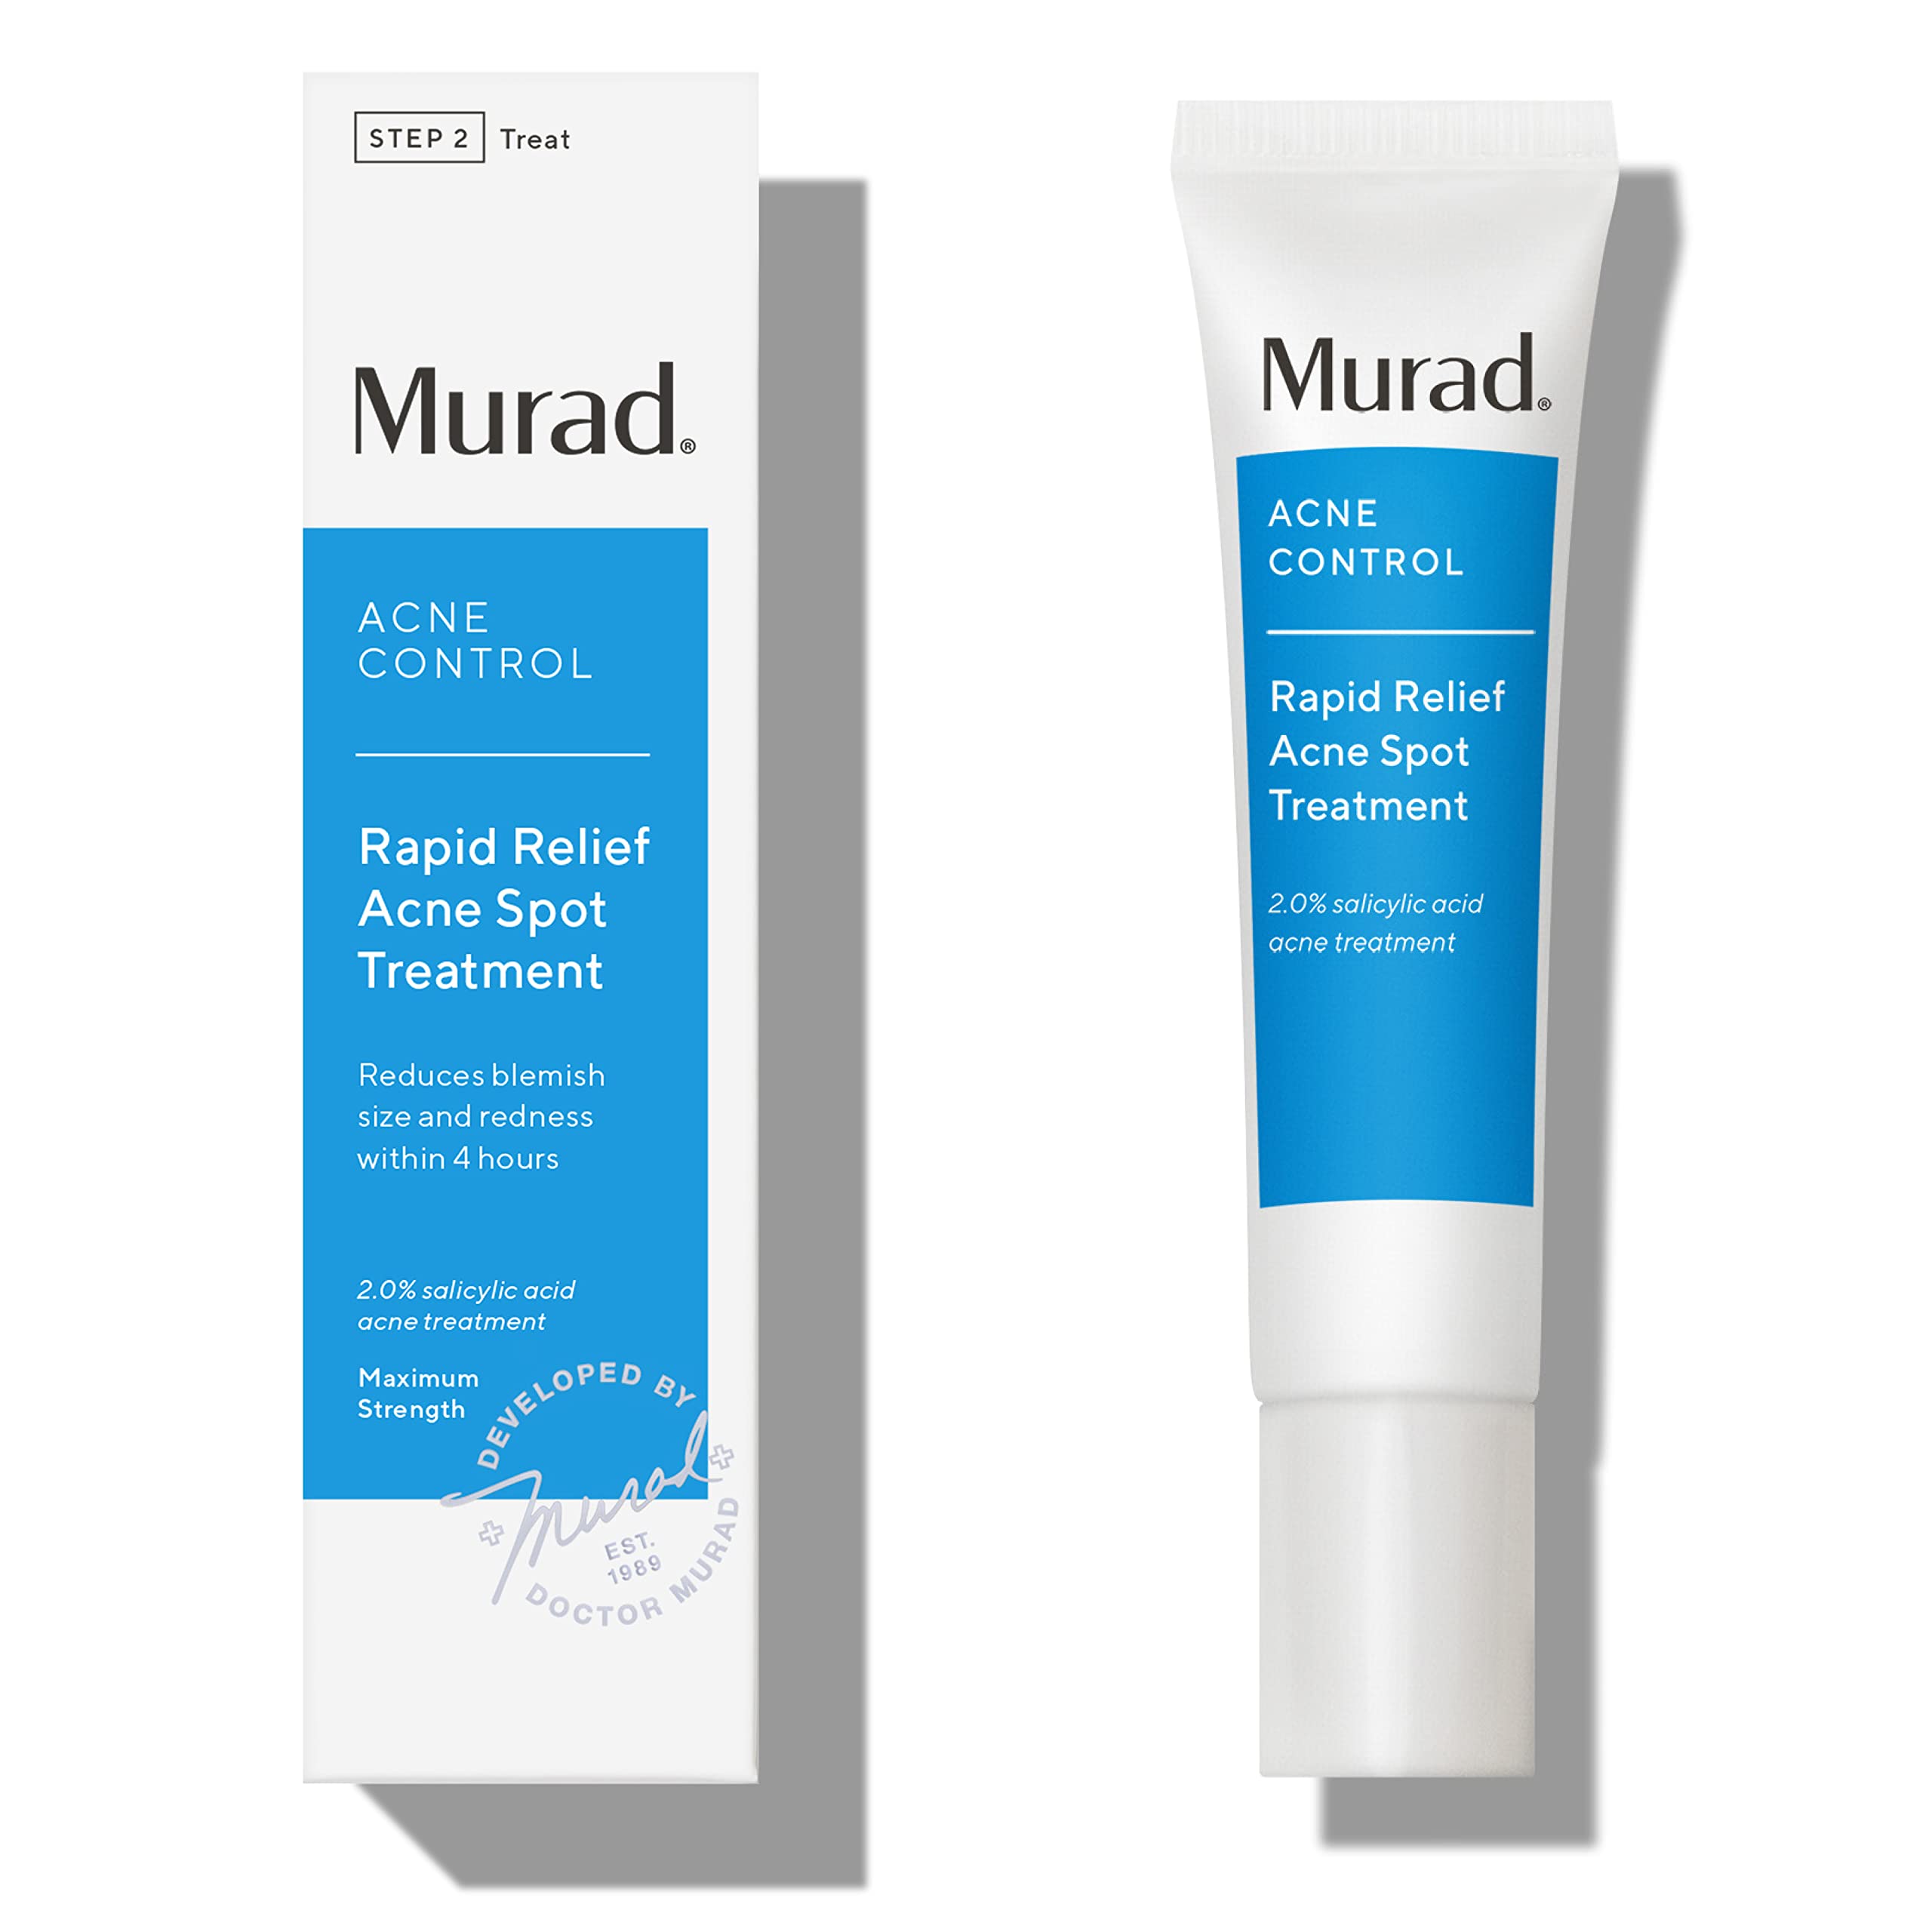 Murad Rapid Relief Acne Spot Treatment – Acne Control Max Strength 2% Salicylic Acid Clear Gel Blemish Remover - Fast Active Acne Relief Backed by Science.5 Oz